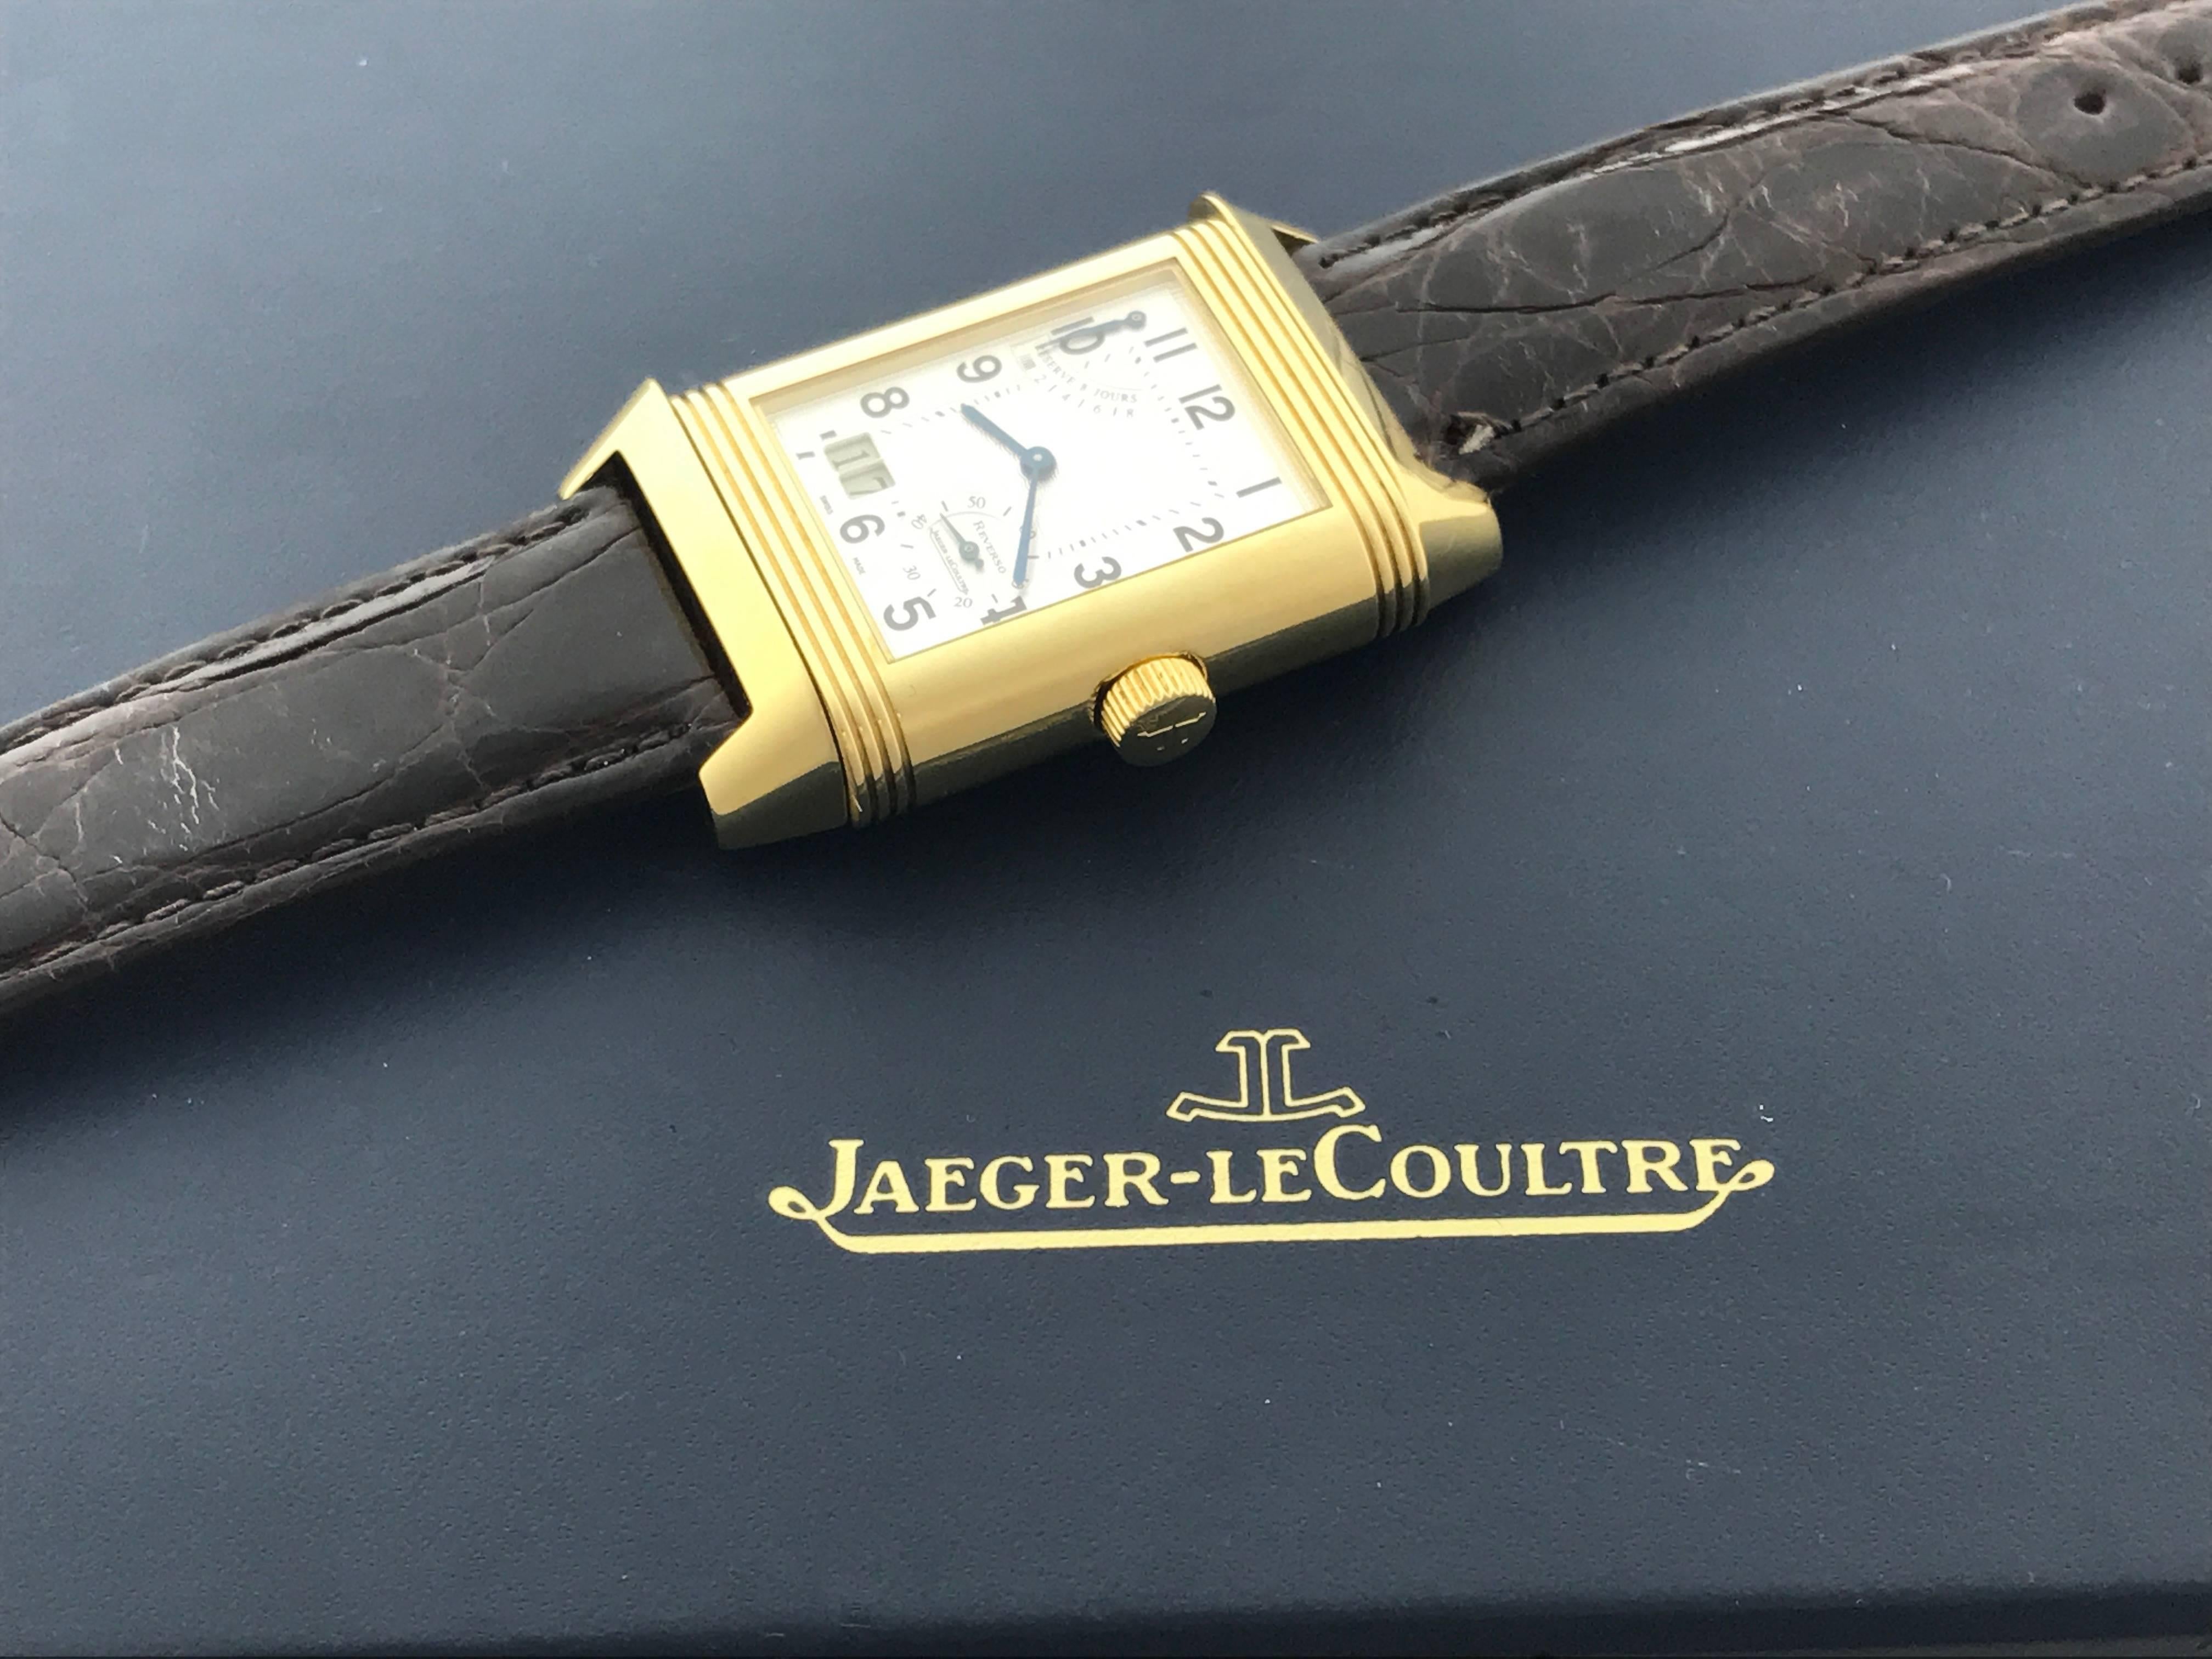 Jaeger-LeCoultre Reverso Model Q300.14.20 certified pre-owned men's wrist watch.  Features include: Manual-winding eight day Caliber 875 movement with duo spring-barrels, power reserve Indicator and big date. Beautiful silver guilloche dial with